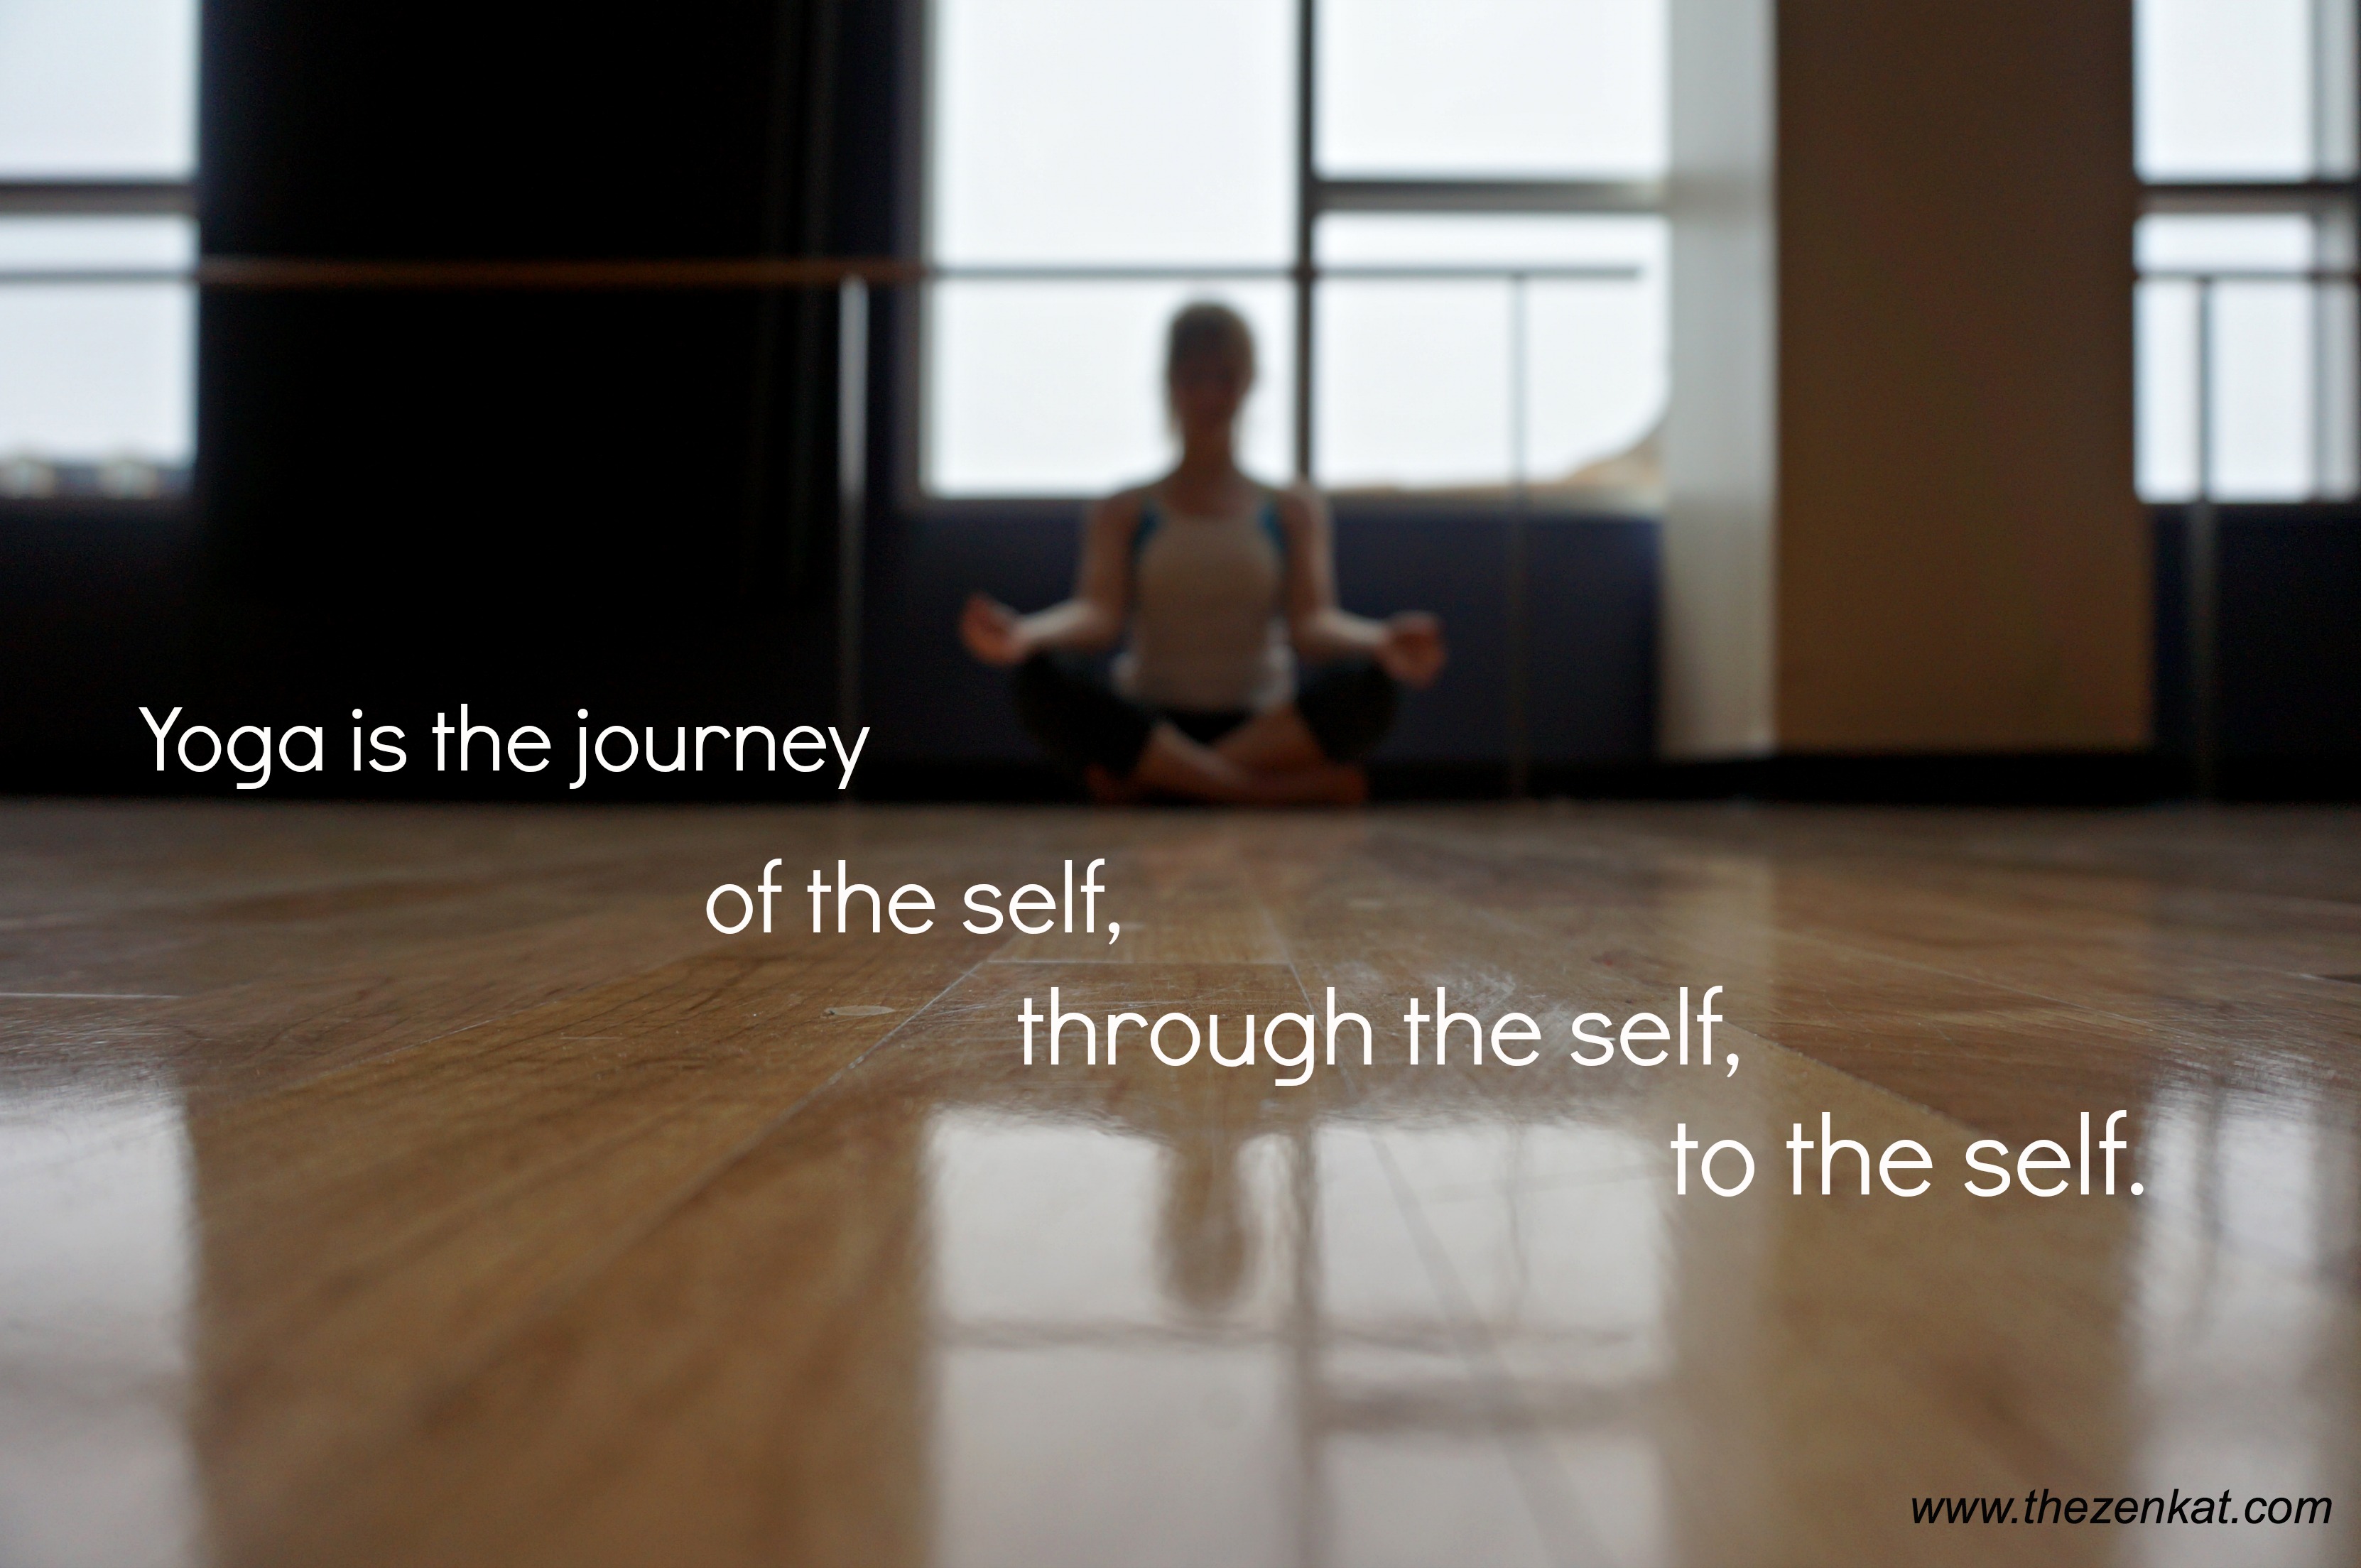 yoga is the journey